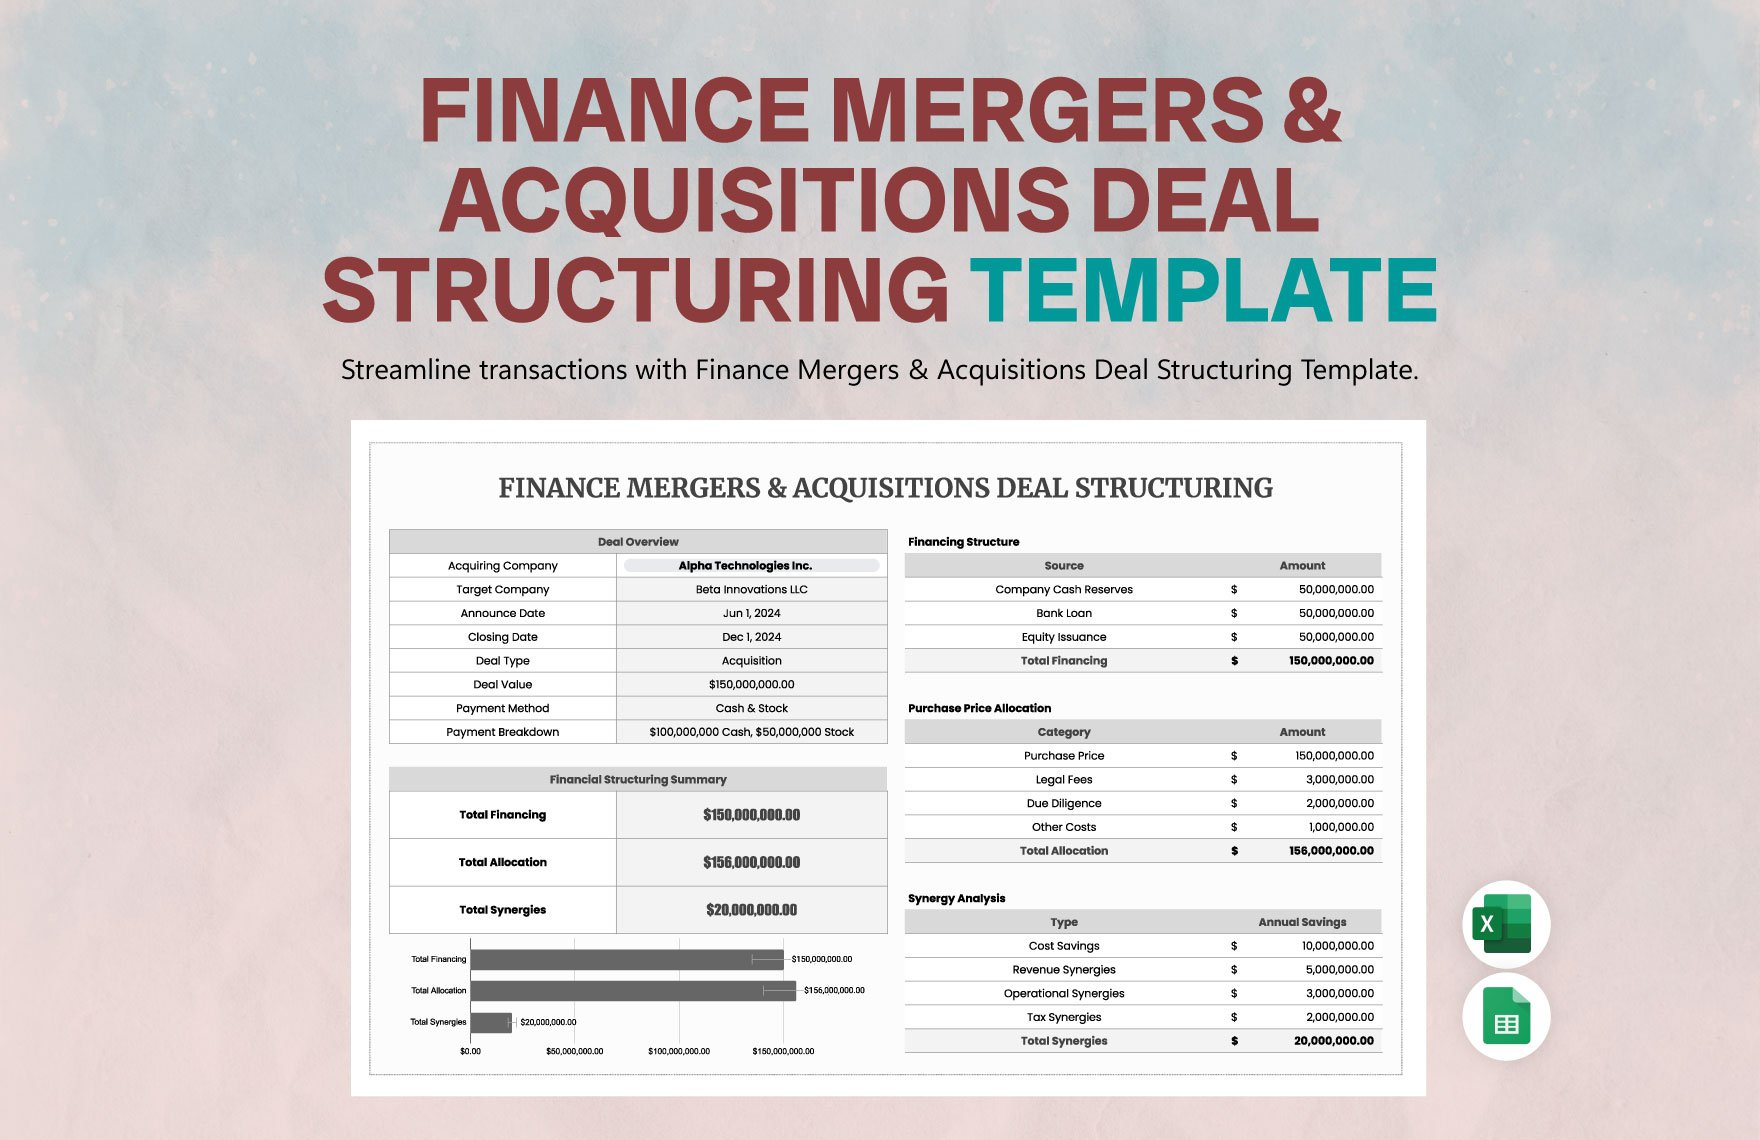 Finance Mergers & Acquisitions Deal Structuring Template